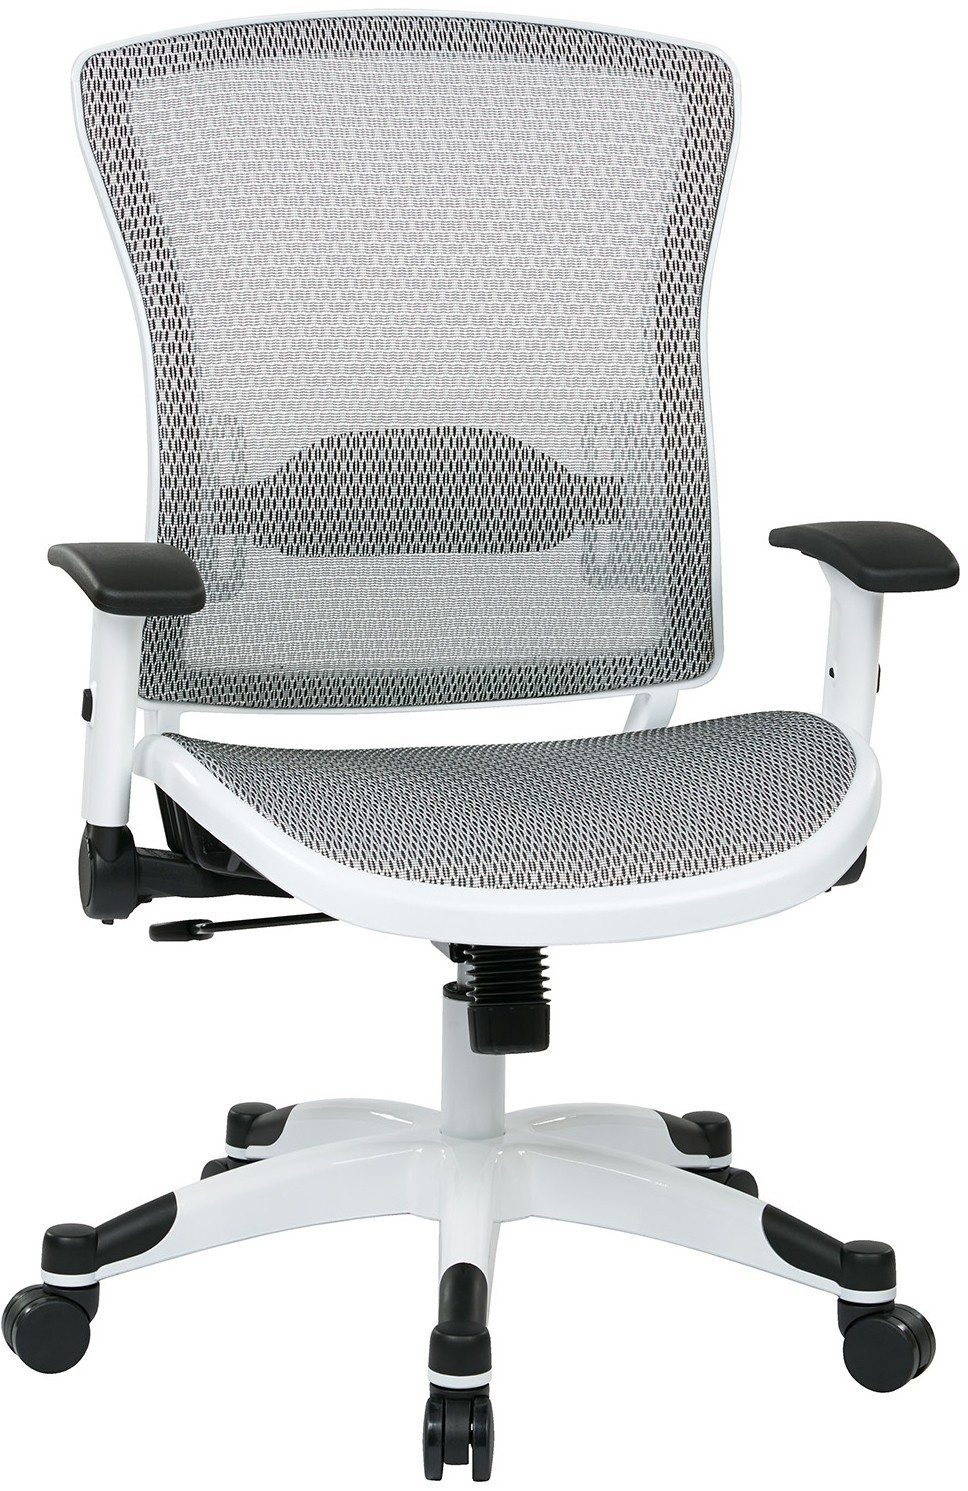 Space Seating Pulsar Series Manager's Chair #317W-W11C1F2W